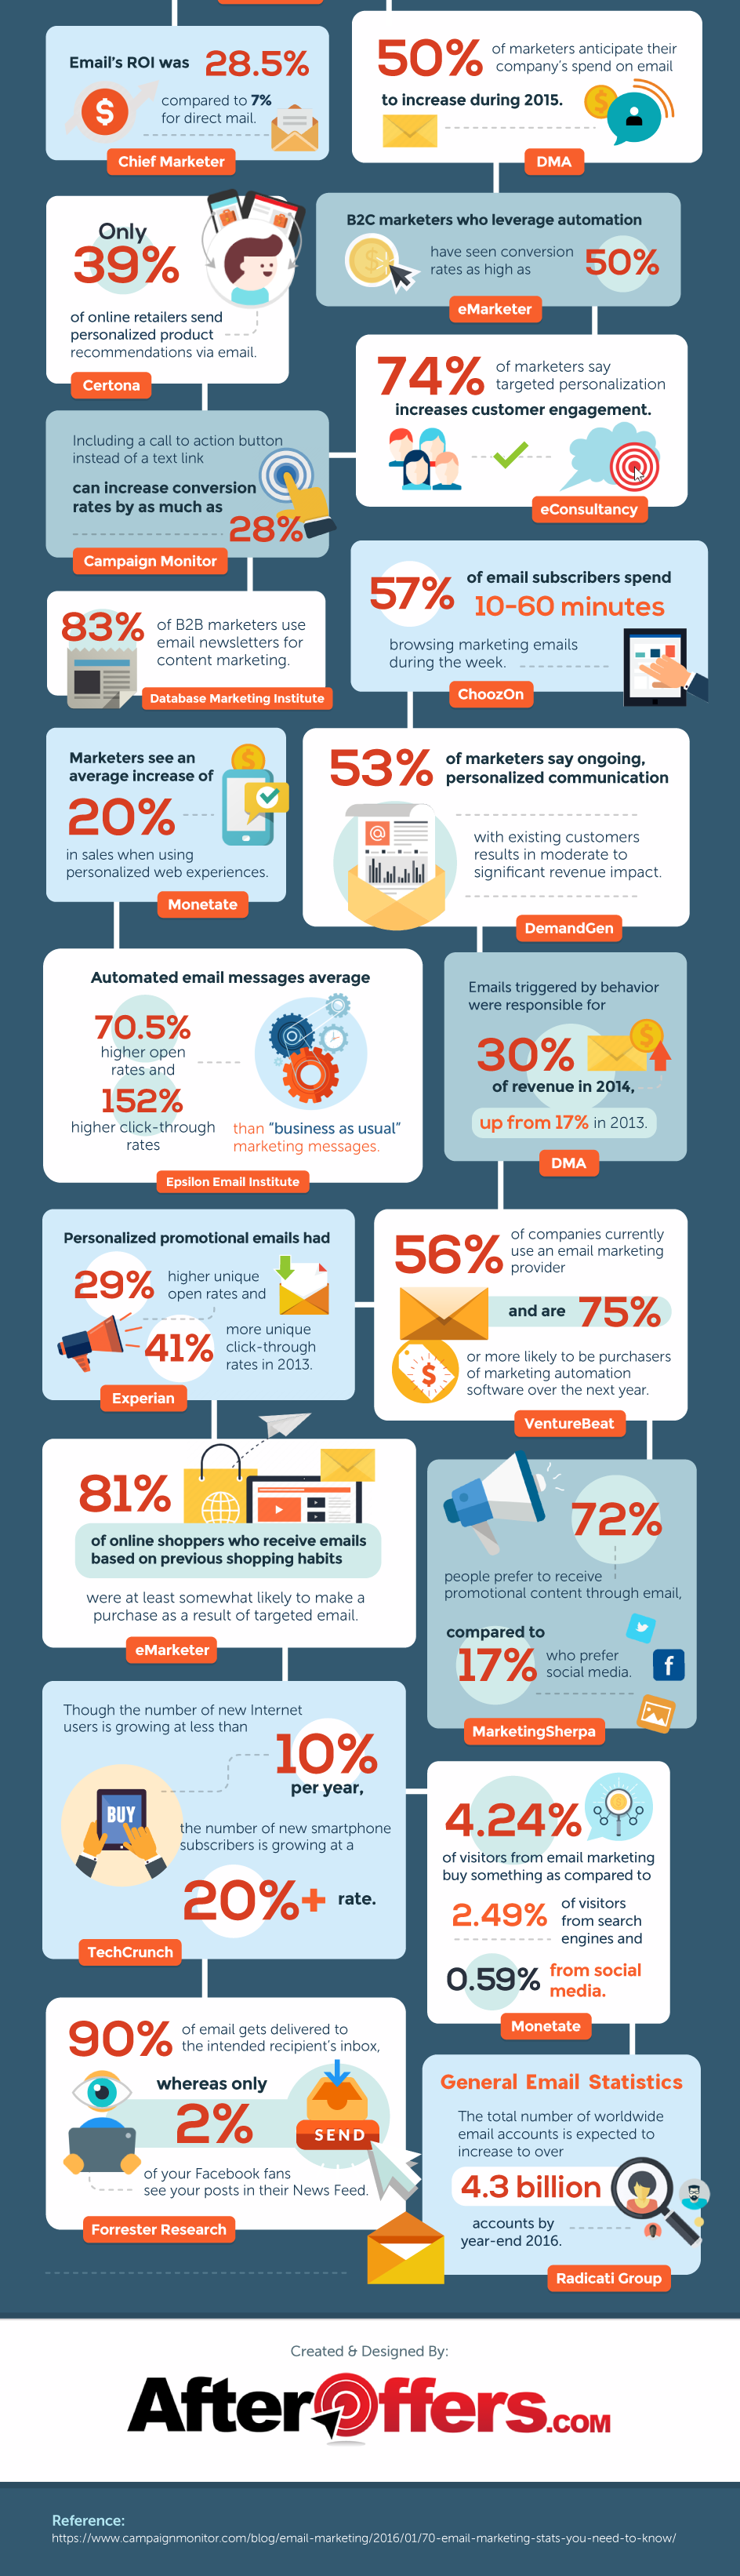 37 email marketing stats to blow your mind hd 1 1